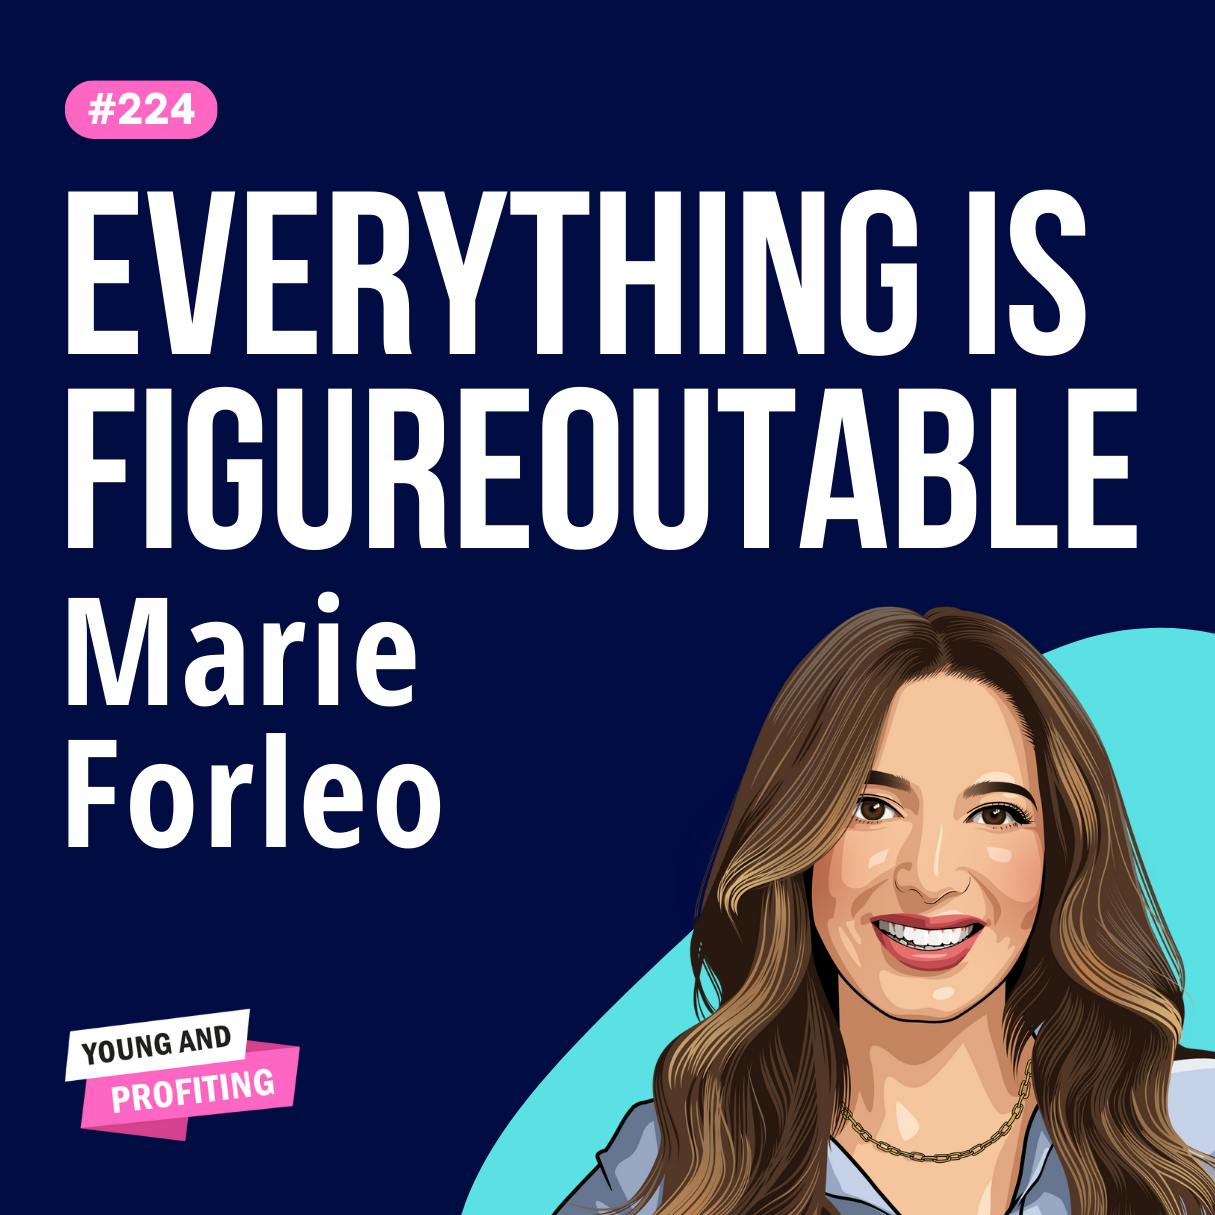 Marie Forleo: Everything is Figureoutable, How to Trust Your Intuition and Build the Life of Your Dreams